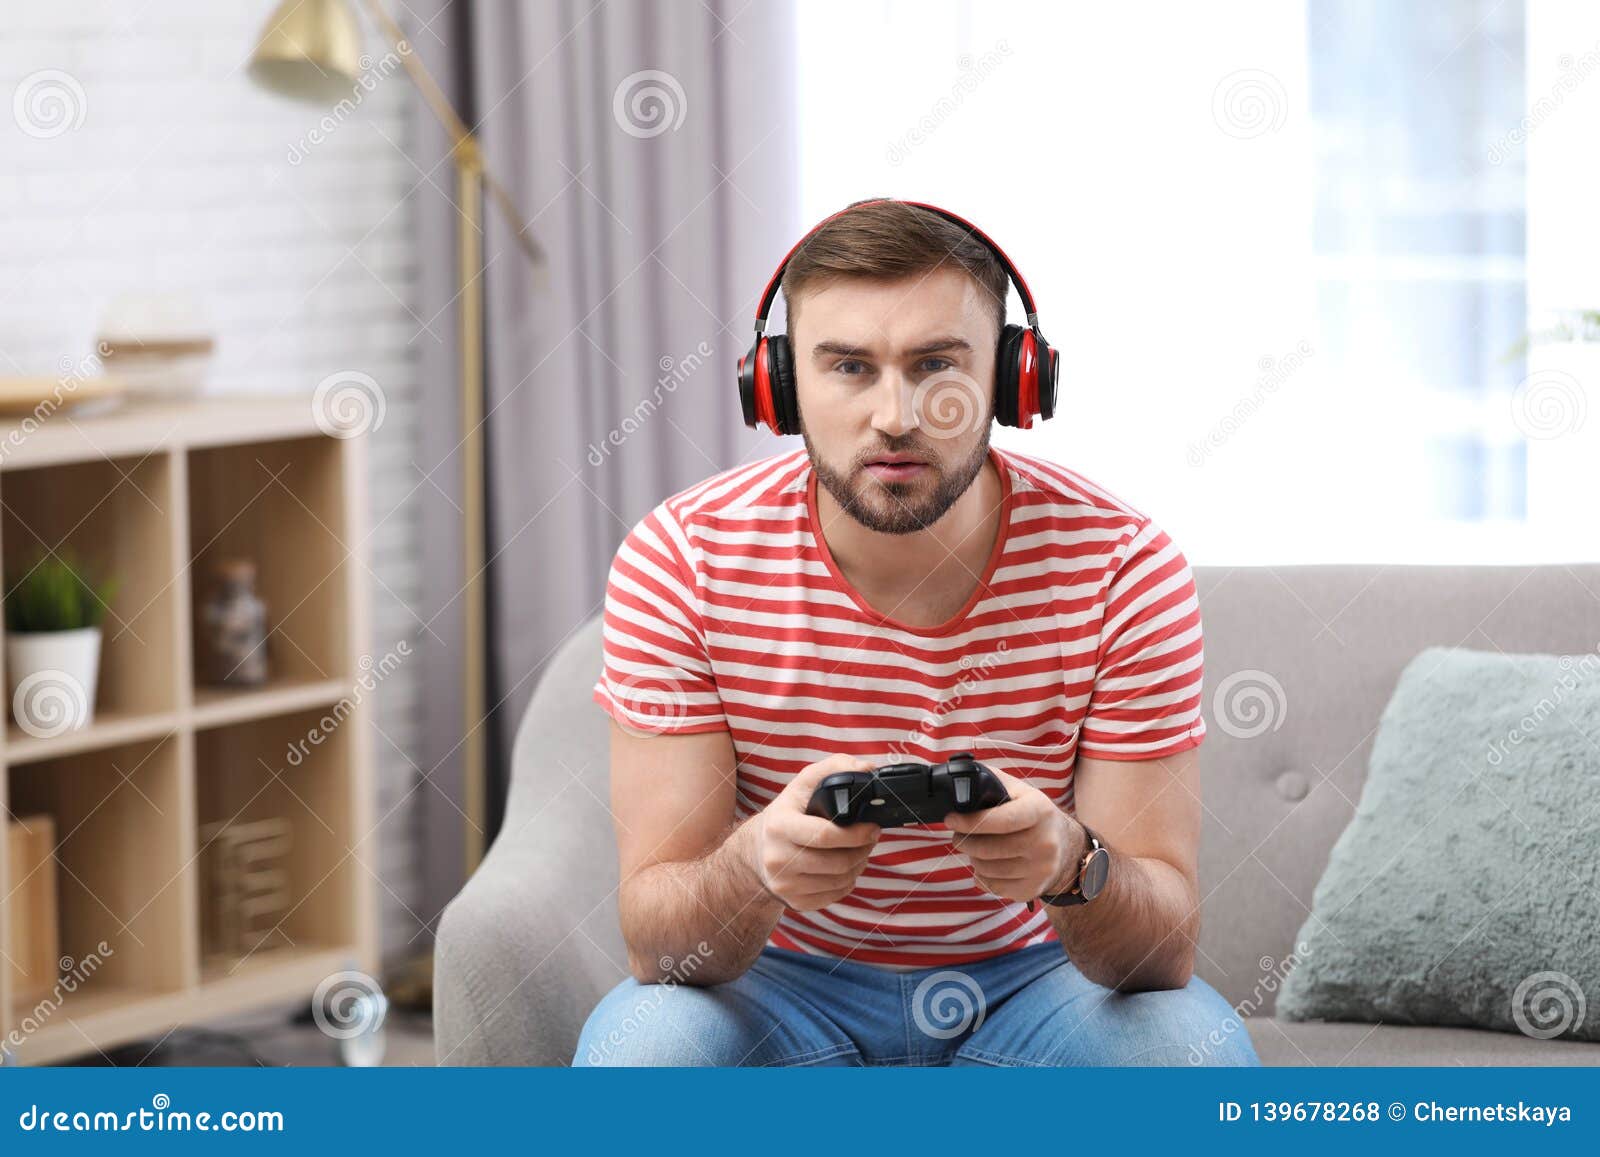 186 Sitting On Ground Playing Video Games Stock Photos, High-Res